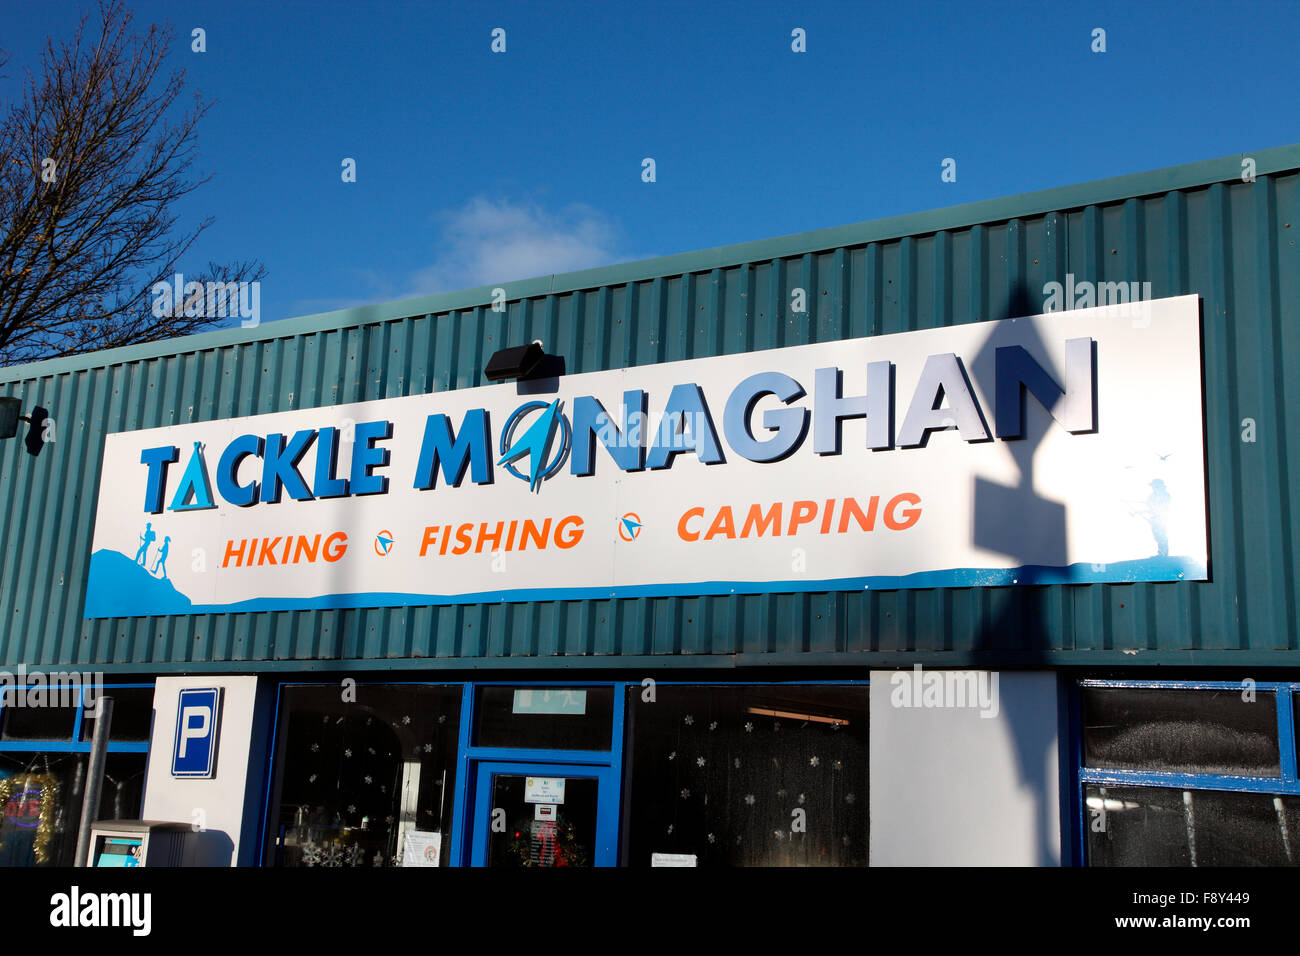 Tackle Monaghan, outdoors activities shop in Monaghan town Stock Photo